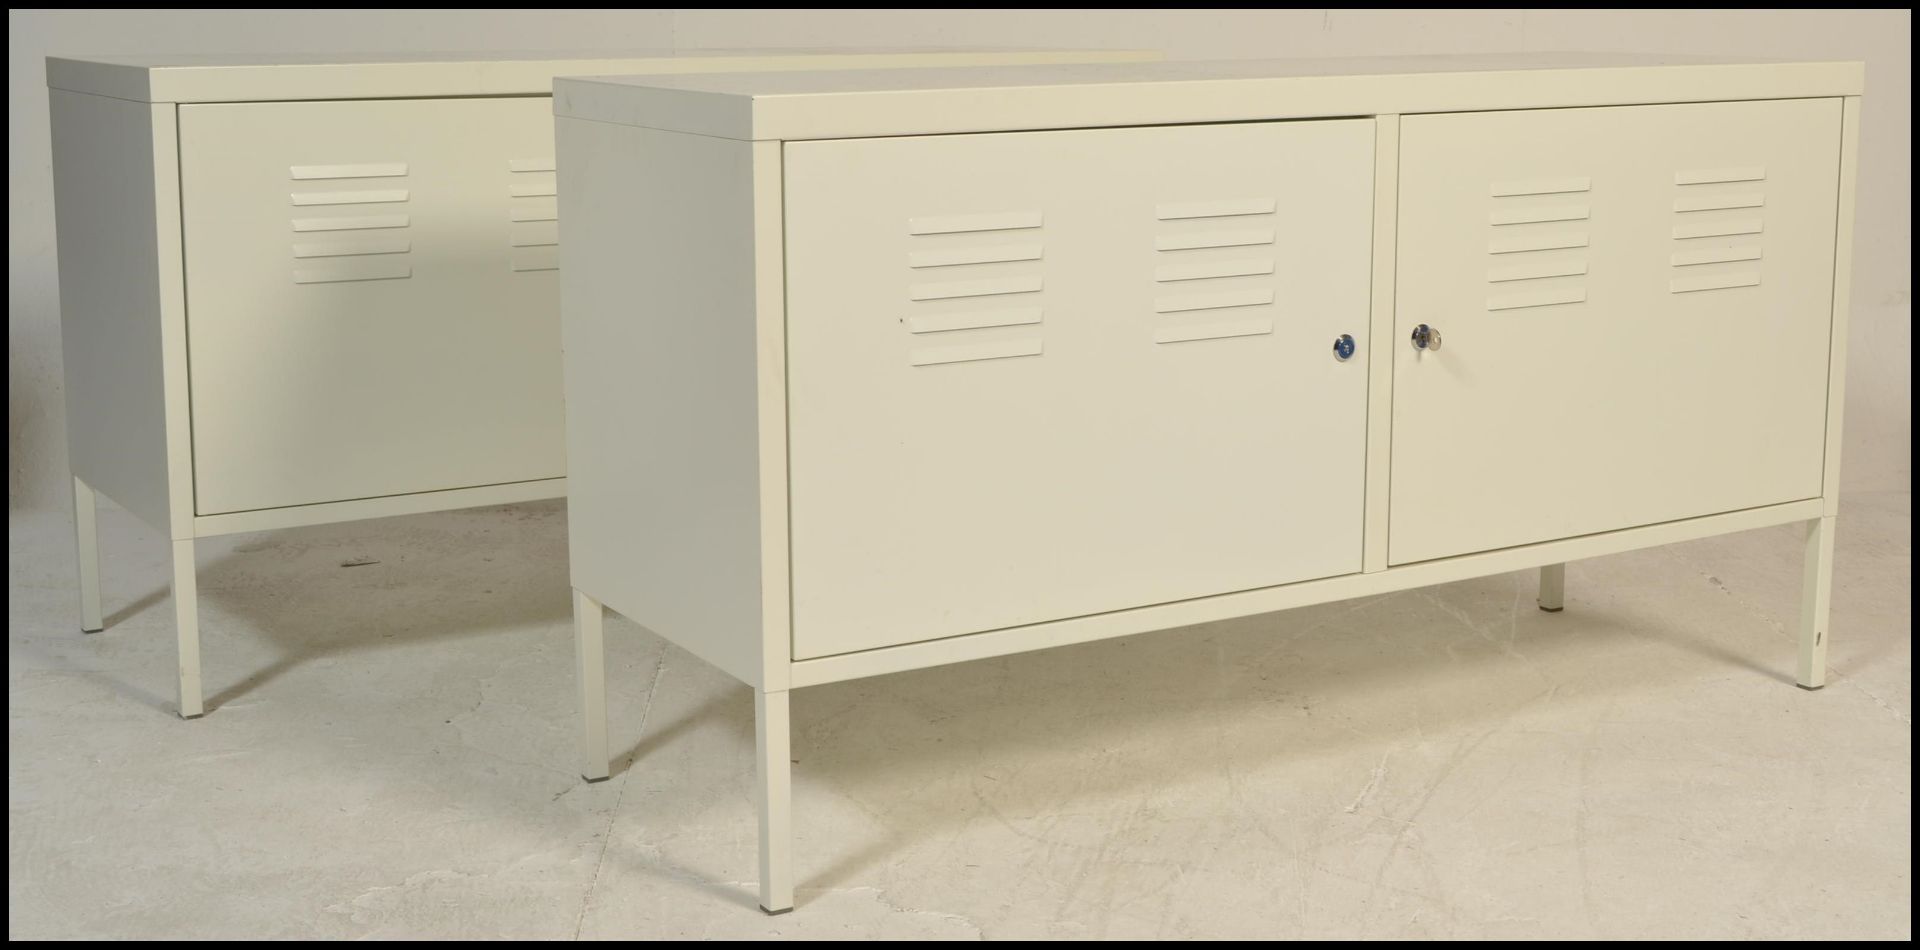 A pair of contemporary metal locker style  sideboard credenzas, each finished in a white colourway